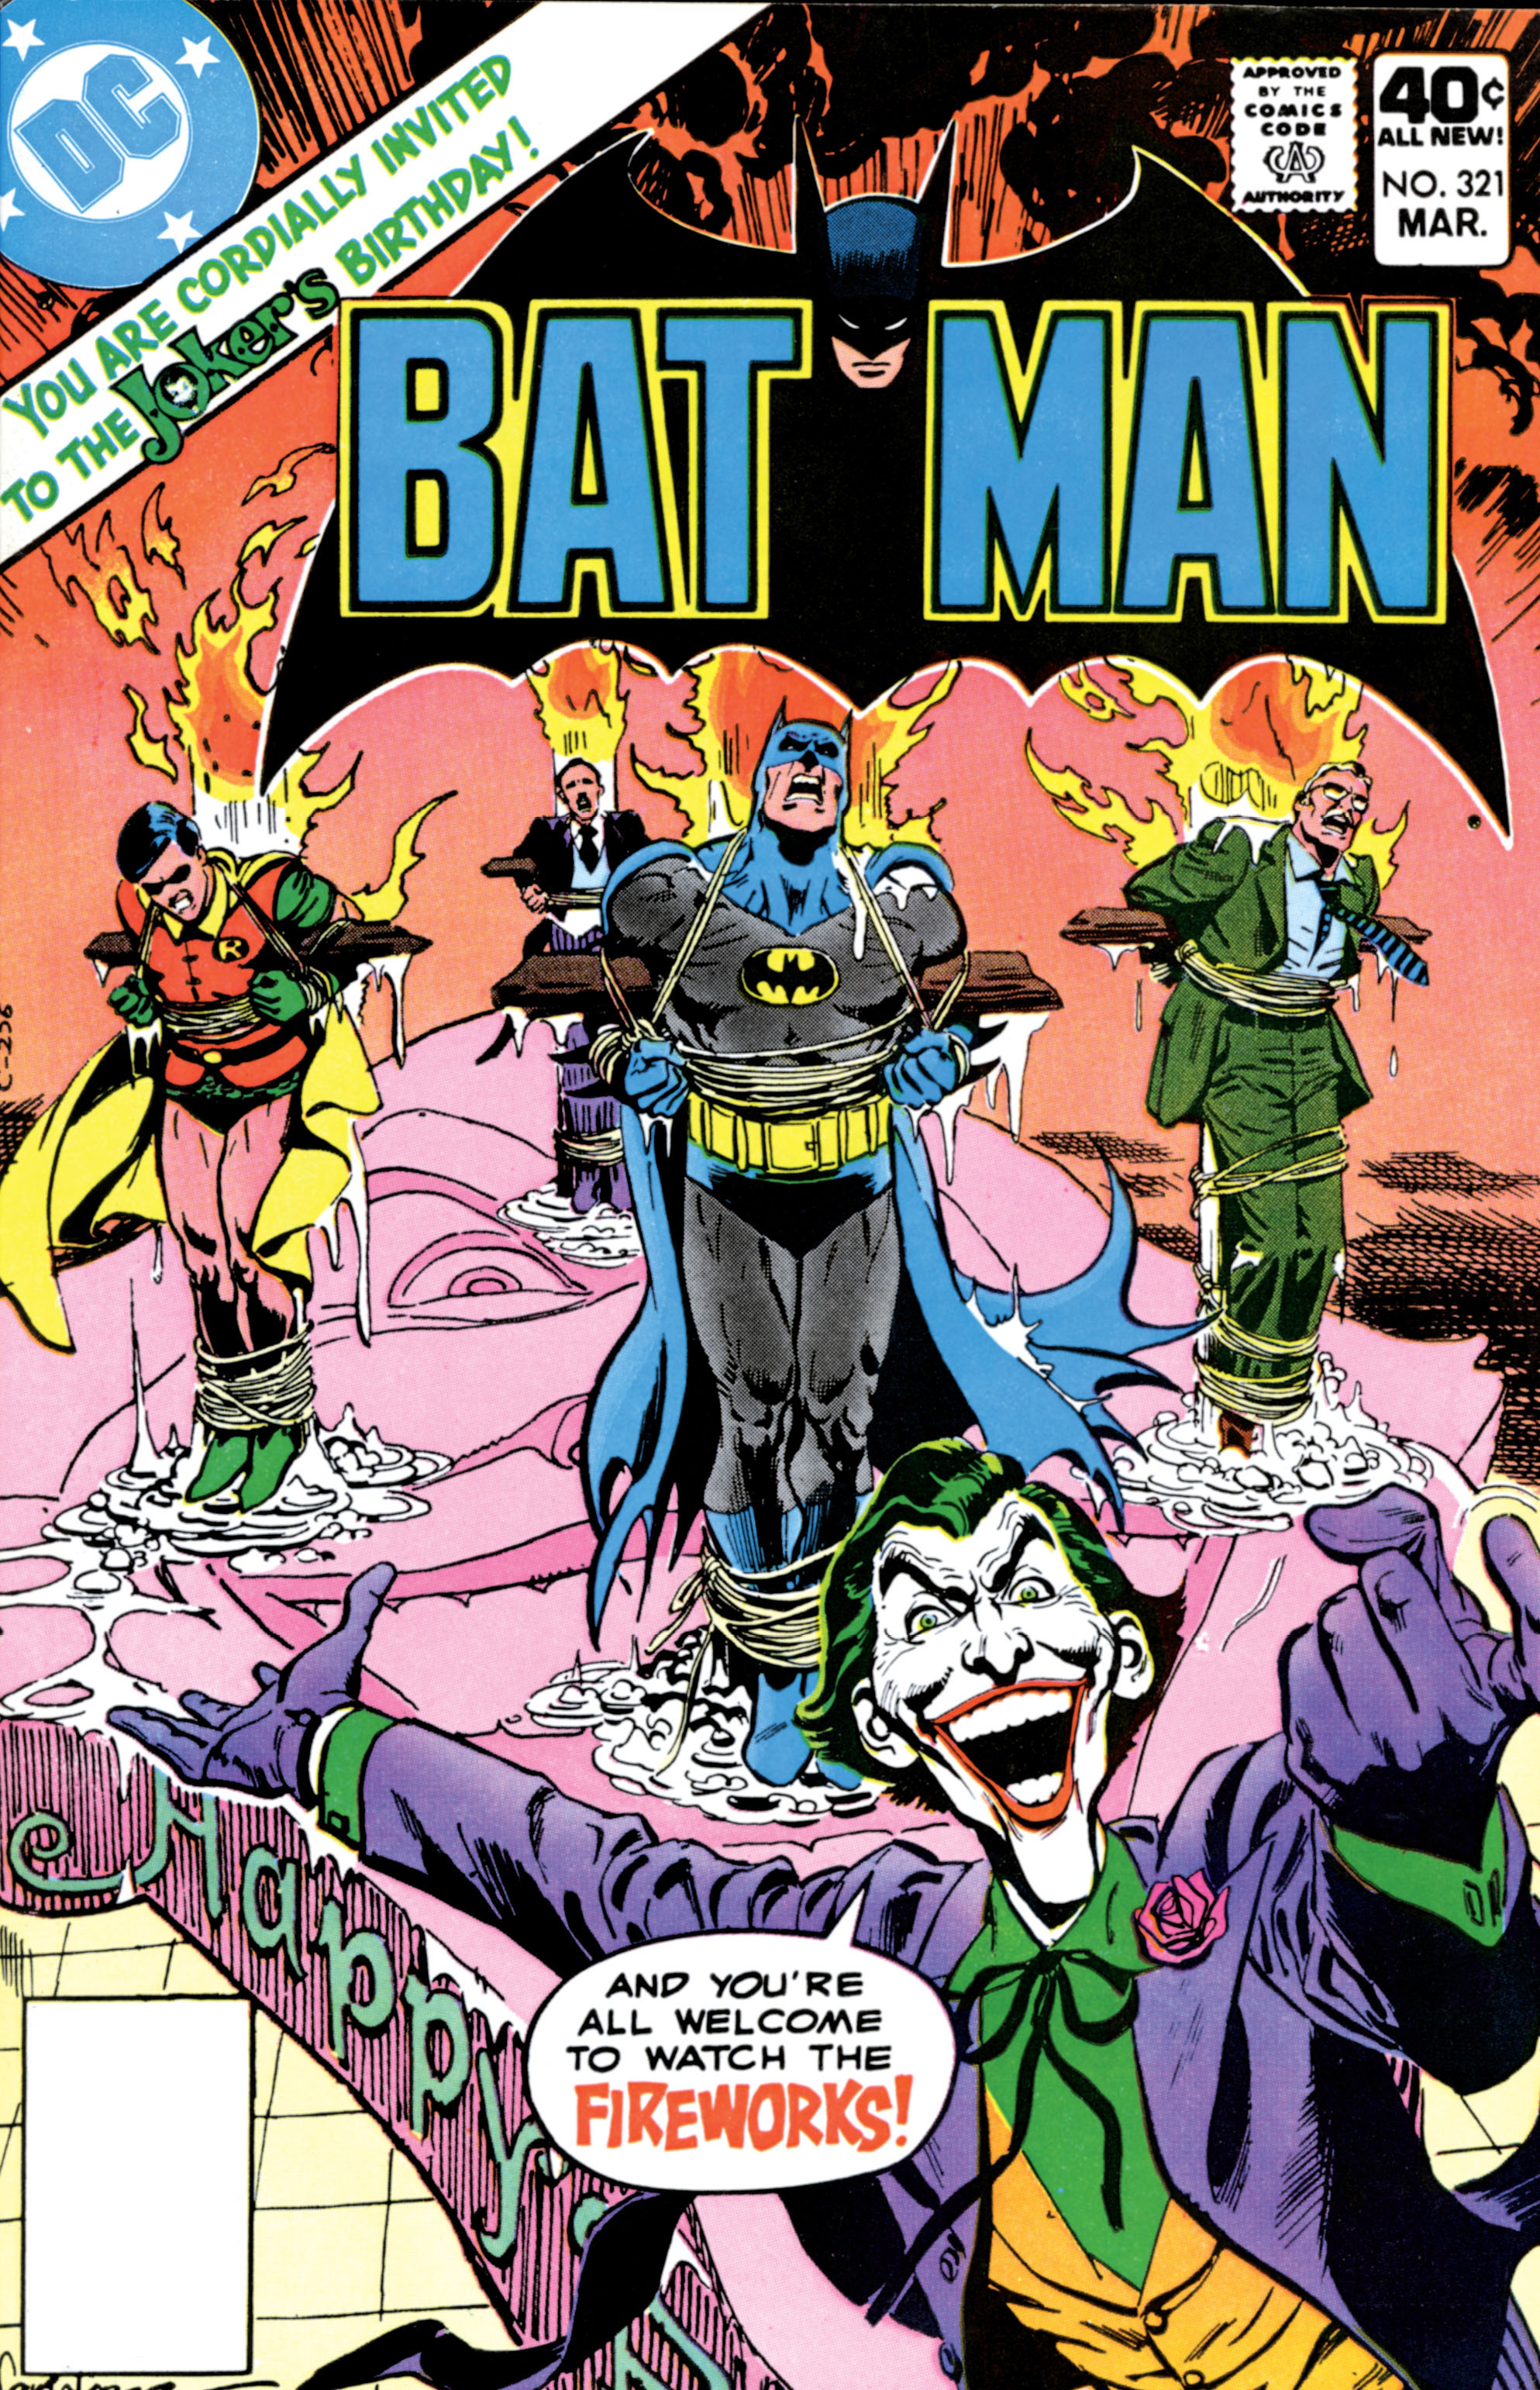 Batman 1940 Issue 321 | Read Batman 1940 Issue 321 comic online in high  quality. Read Full Comic online for free - Read comics online in high  quality .|